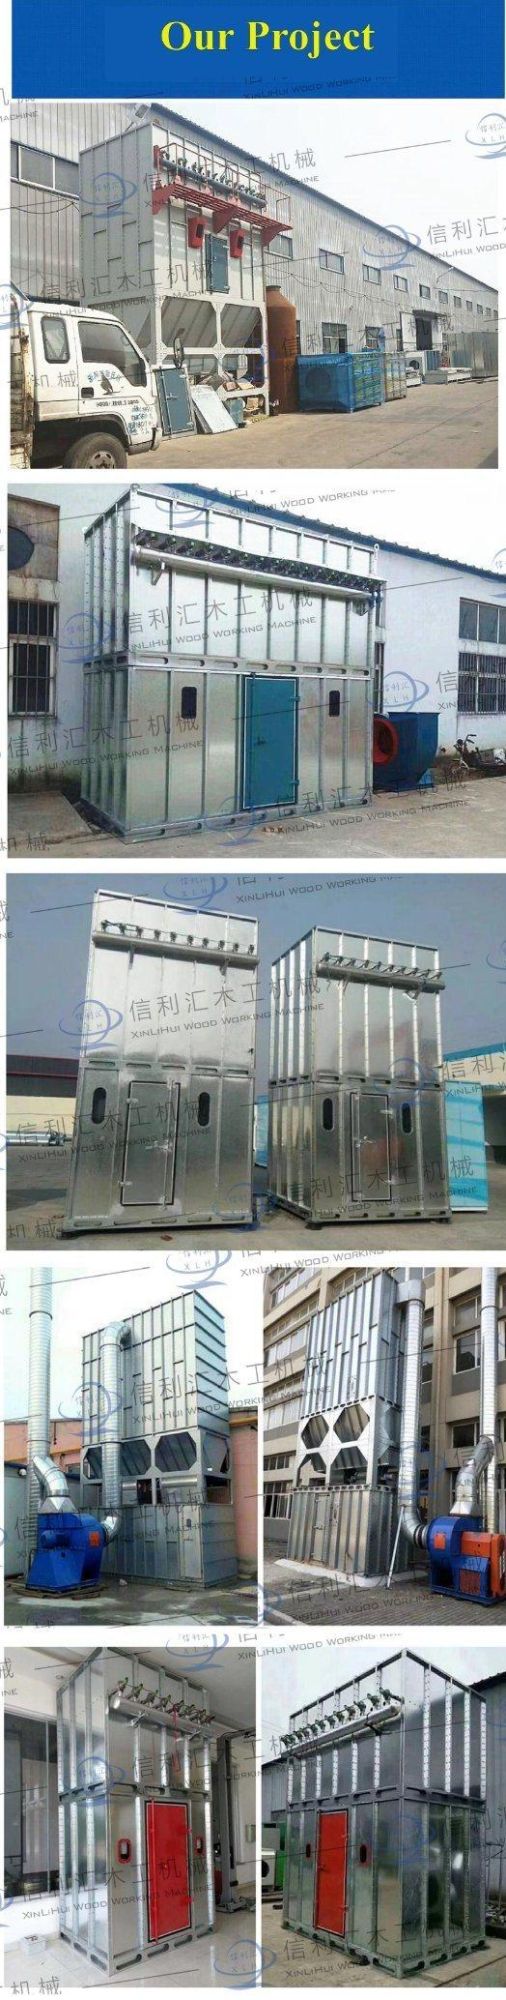 Woodworking Furniture Factory Central Dust Removal Pulse Bag Dust Collector Industrial Dust Removal Equipment Environmental Protection Equipment Dust Recycling